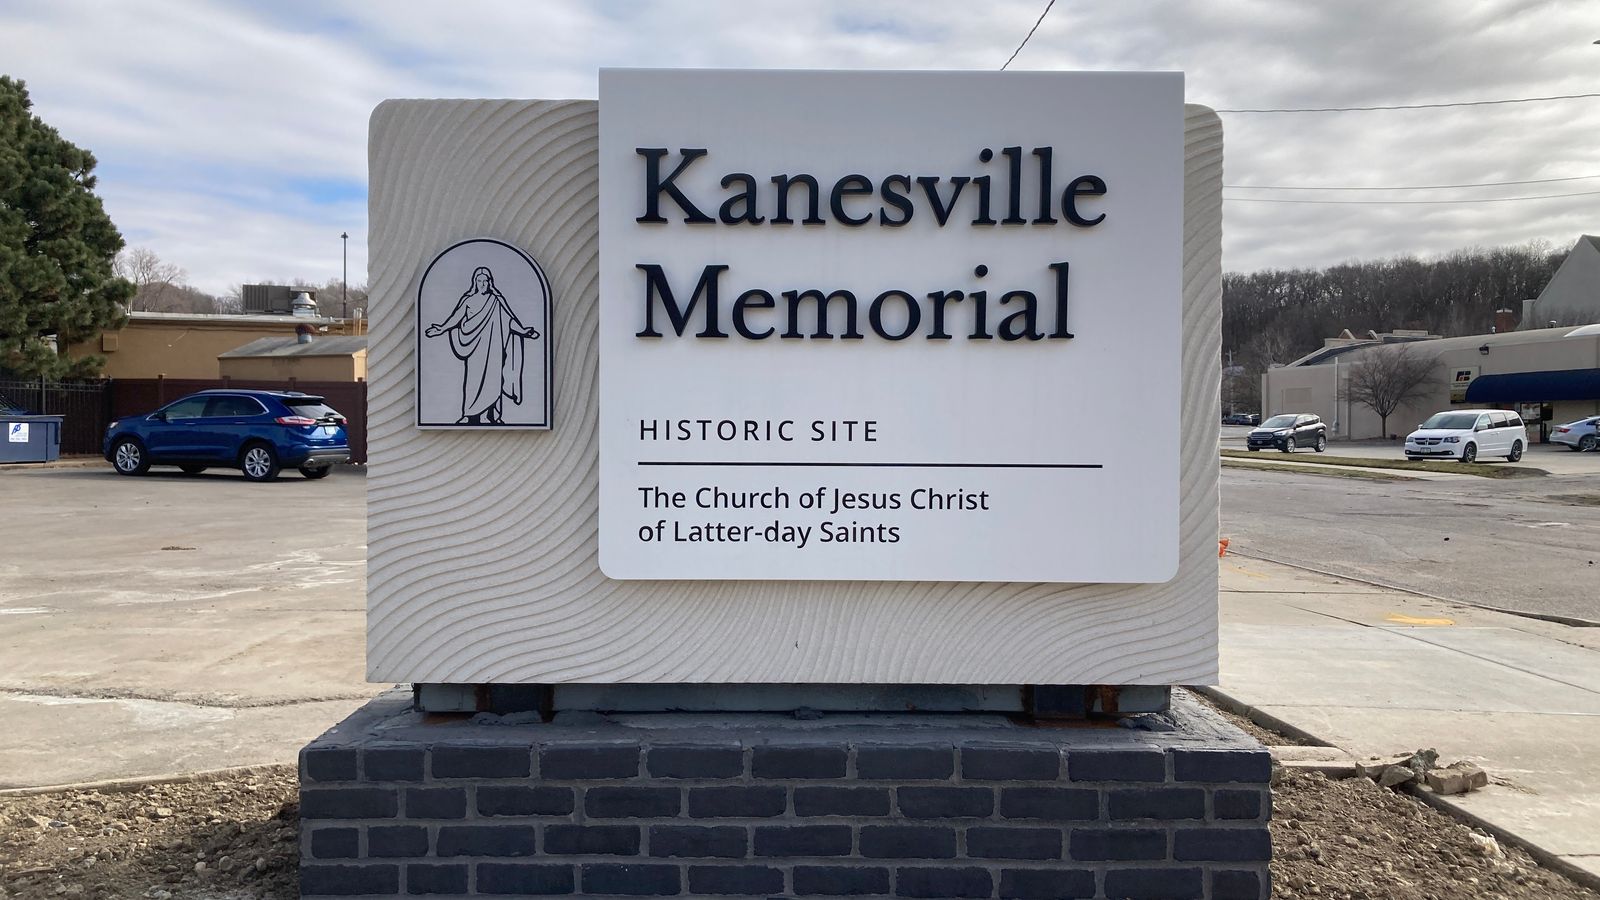 Various images from the Kanesville Memorial